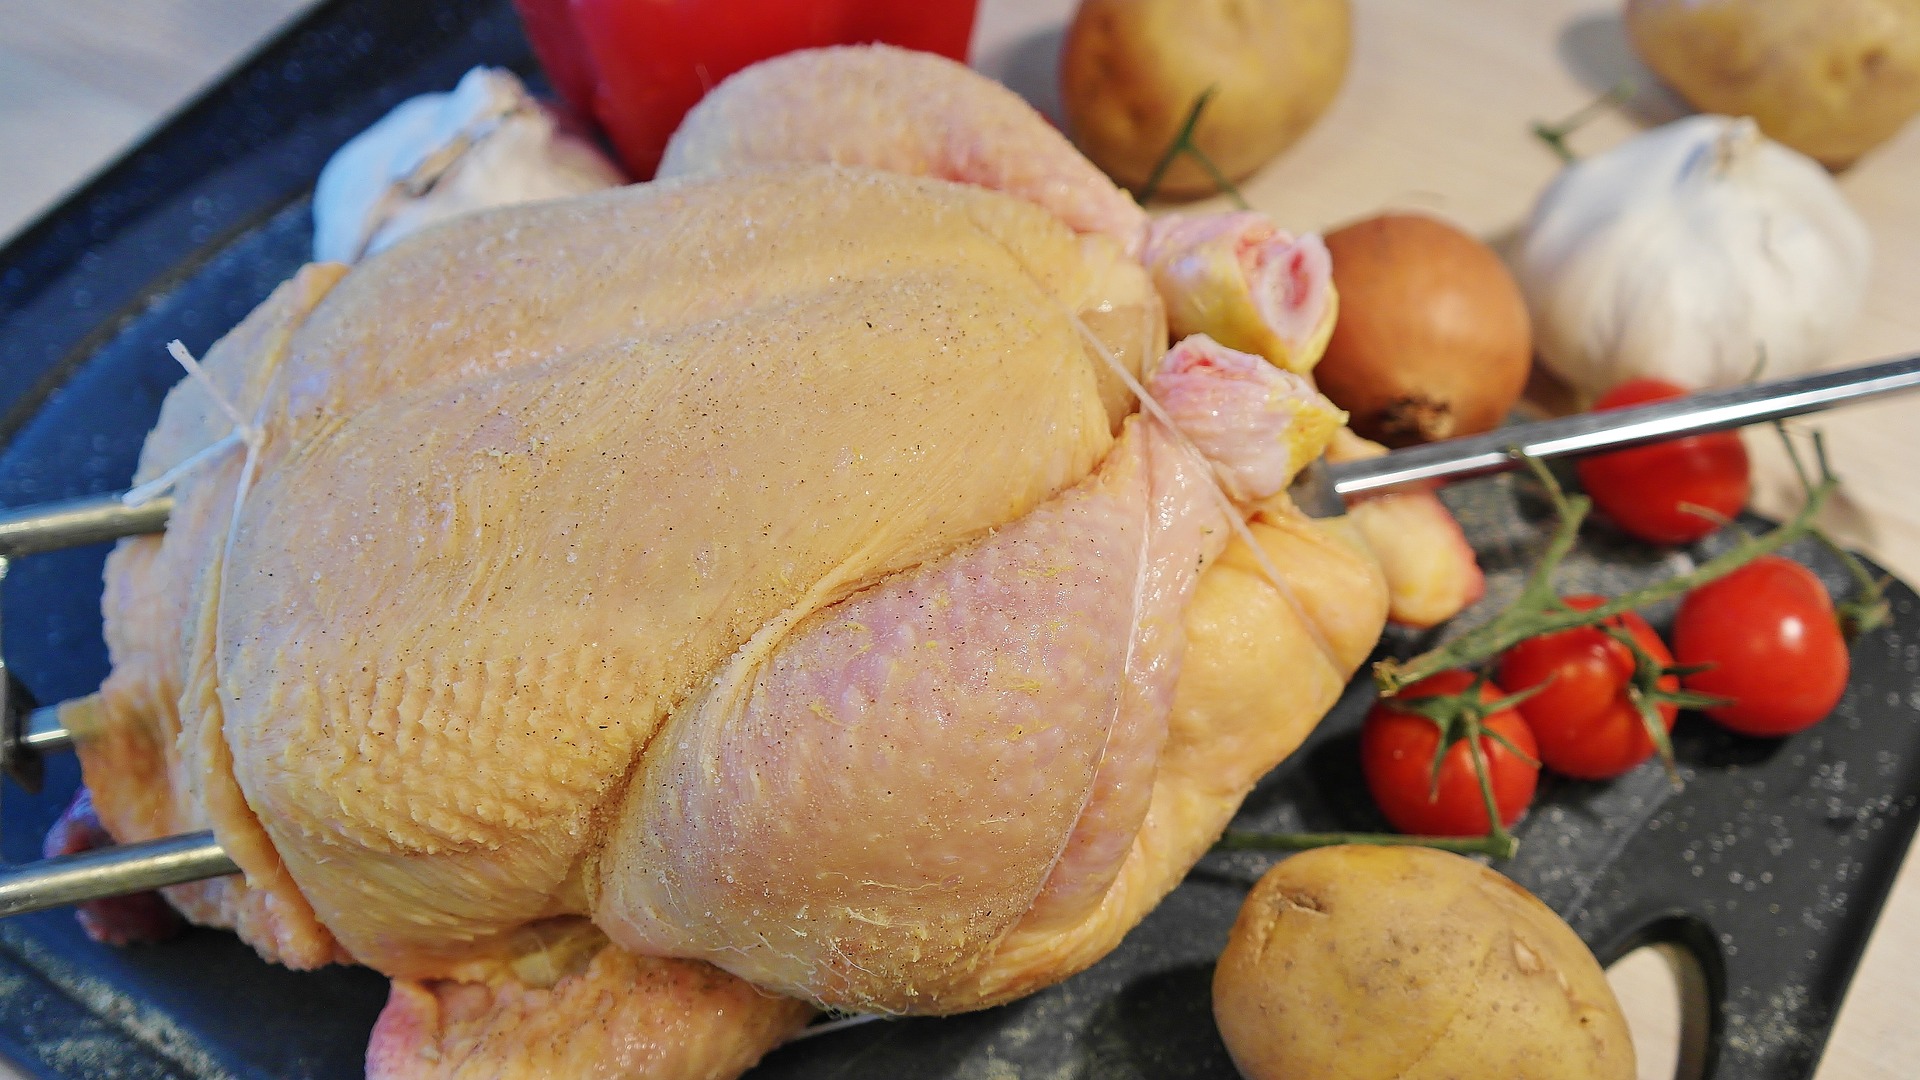 DA: Tariff on chicken imports must apply if there’s evidence of dumping